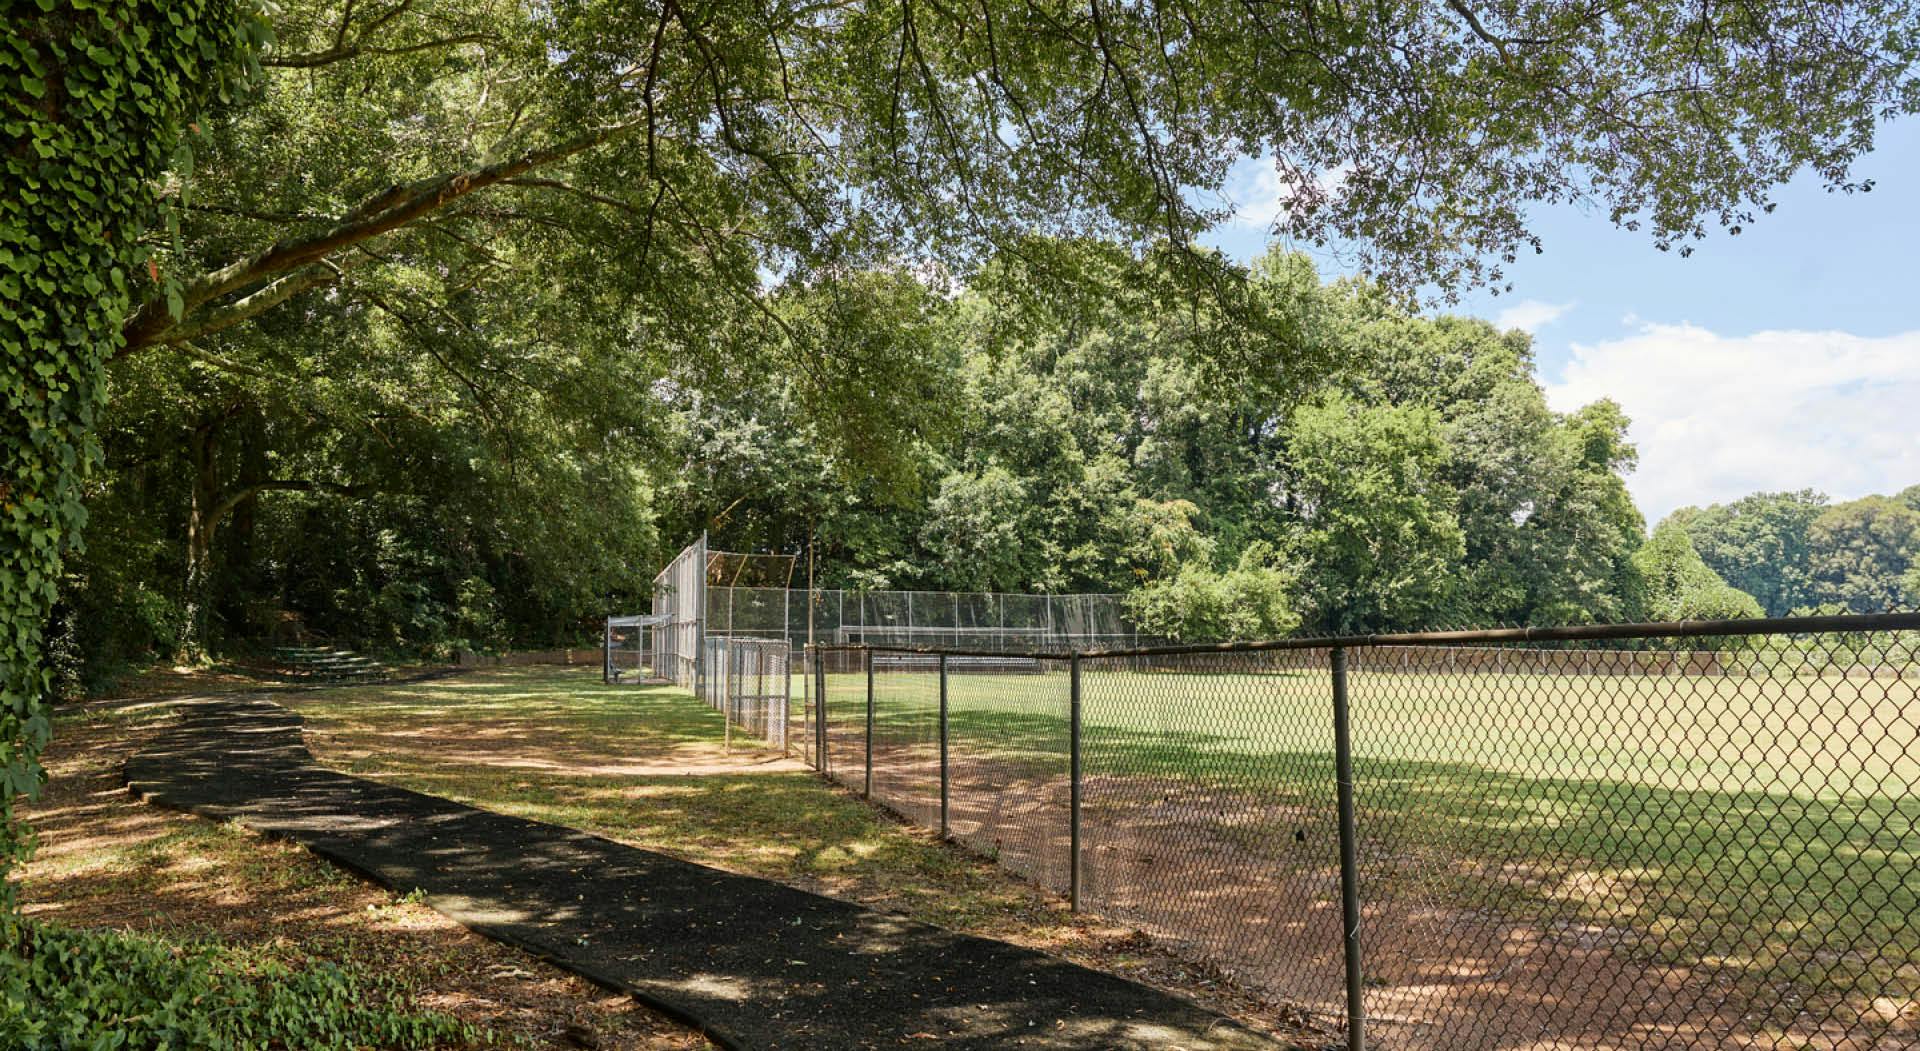 The baseball field in Arthur Langford, Jr. Park with a paved paths and bleachers in the shade. (Photo Credit: Erin Sintos)